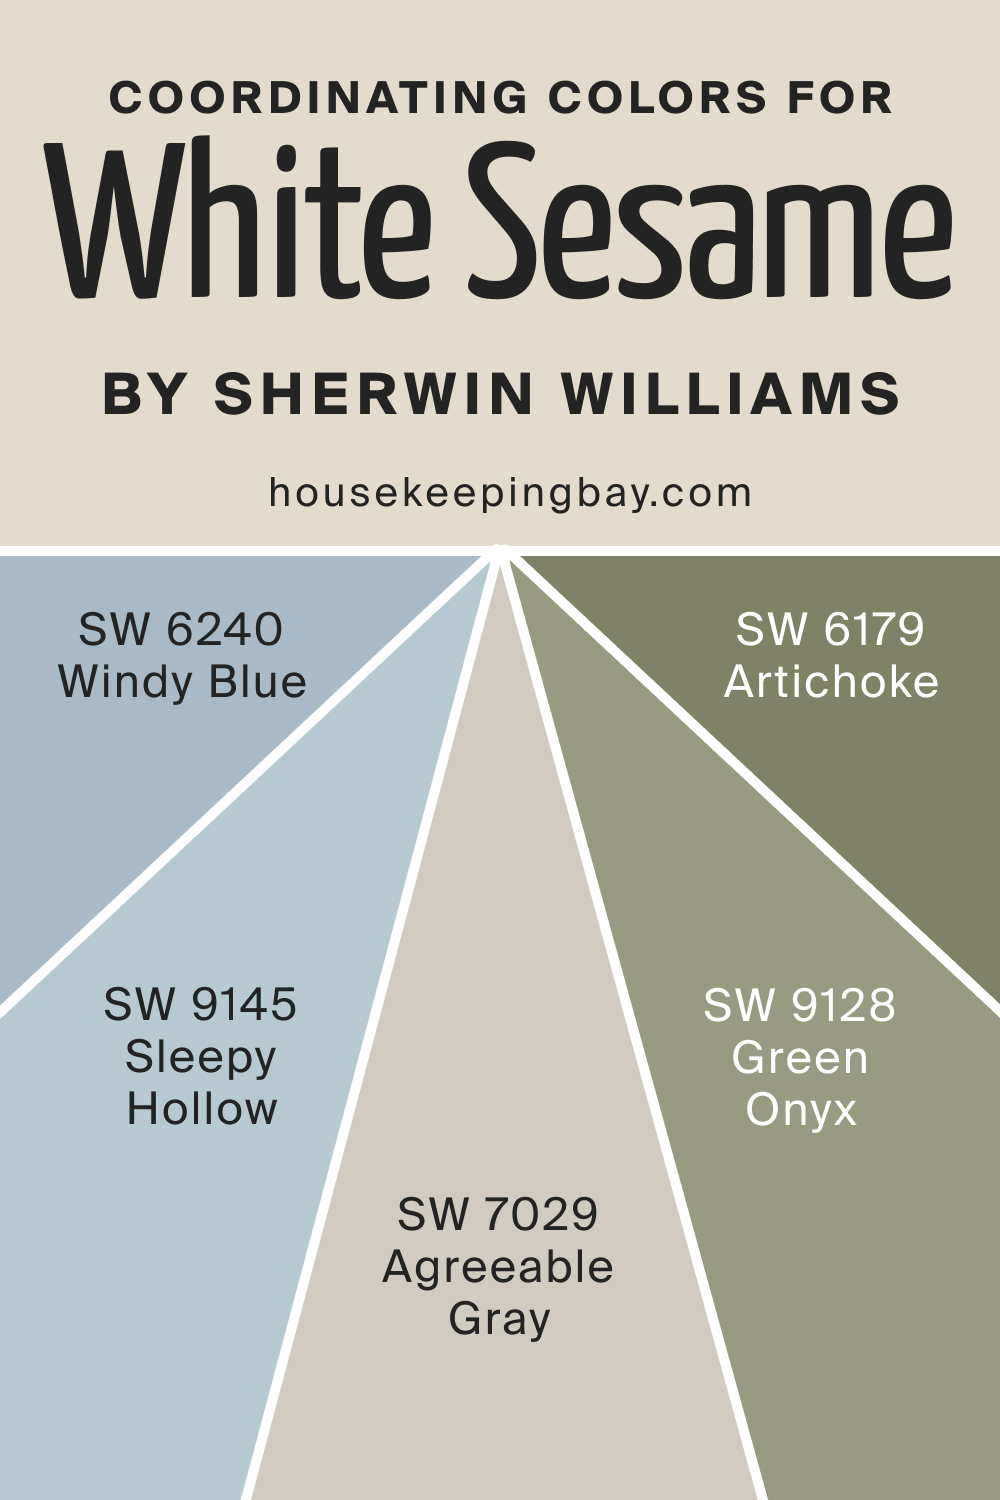 Coordinating Colors for SW 9586 White Sesame by Sherwin Williams